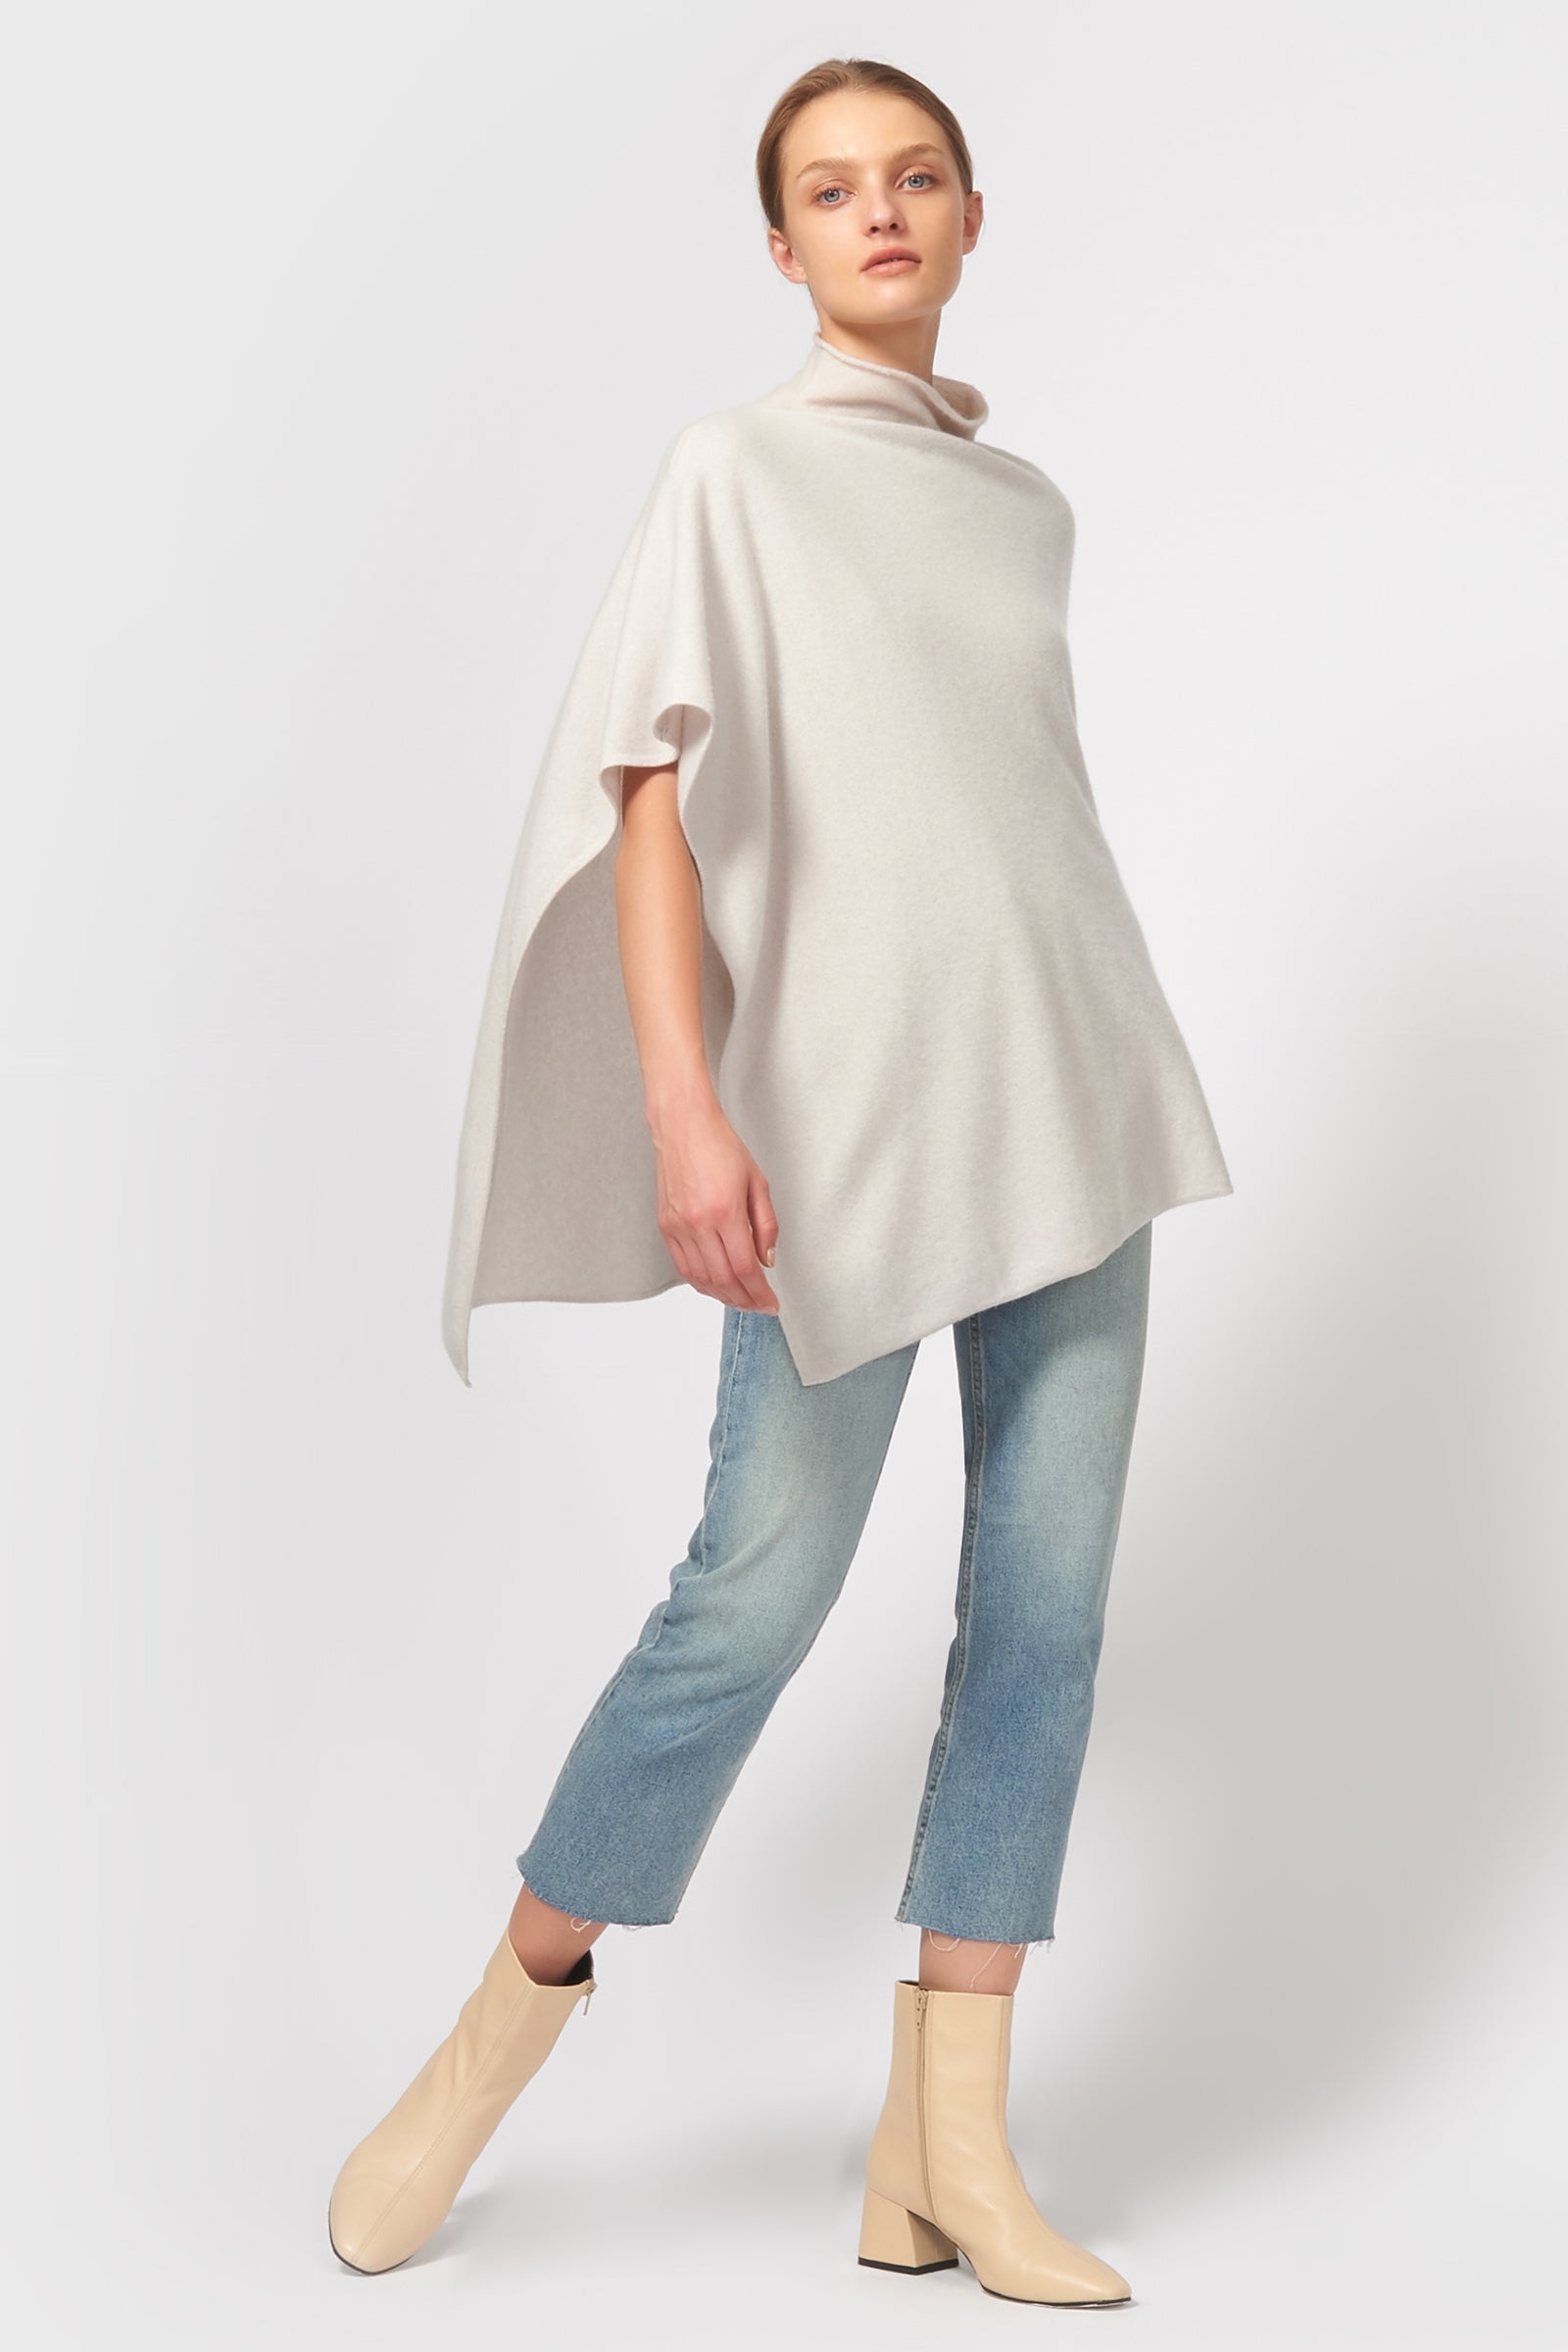 Kal Rieman Cashmere Poncho in Haze on Model Front Full View